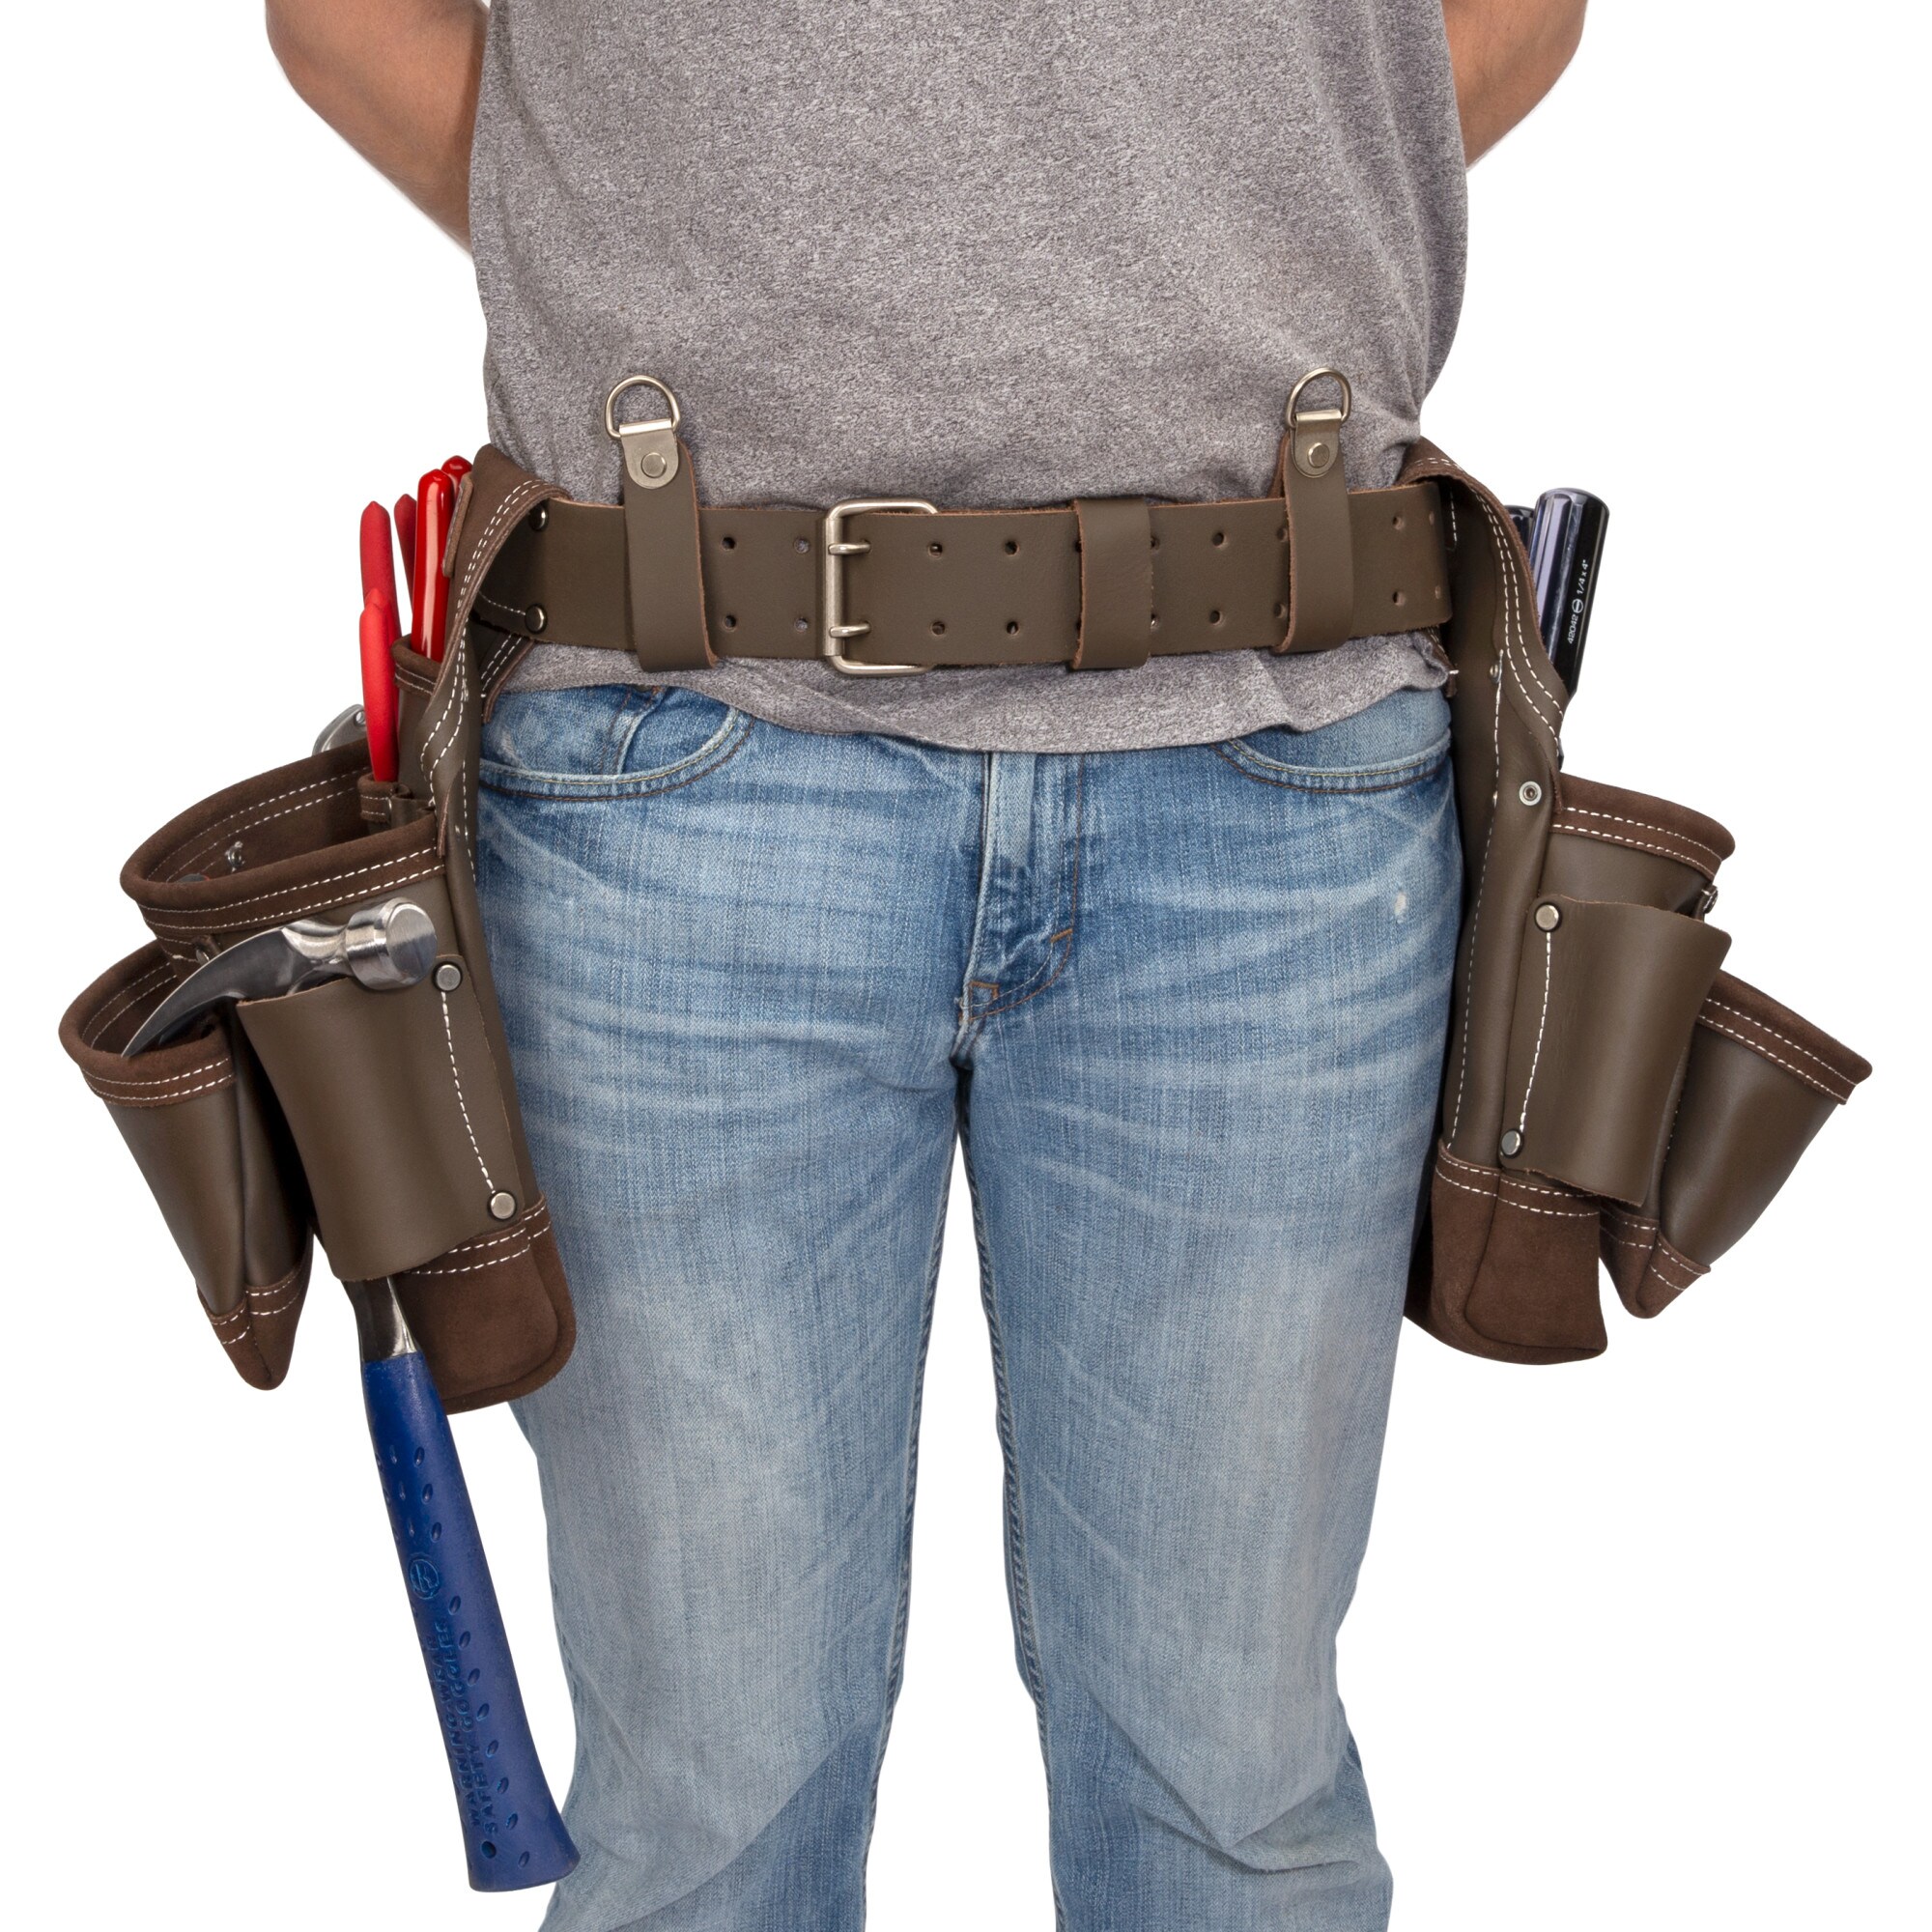 Estwing Framer Leather Tool Apron in the Tool Belts department at Lowes.com